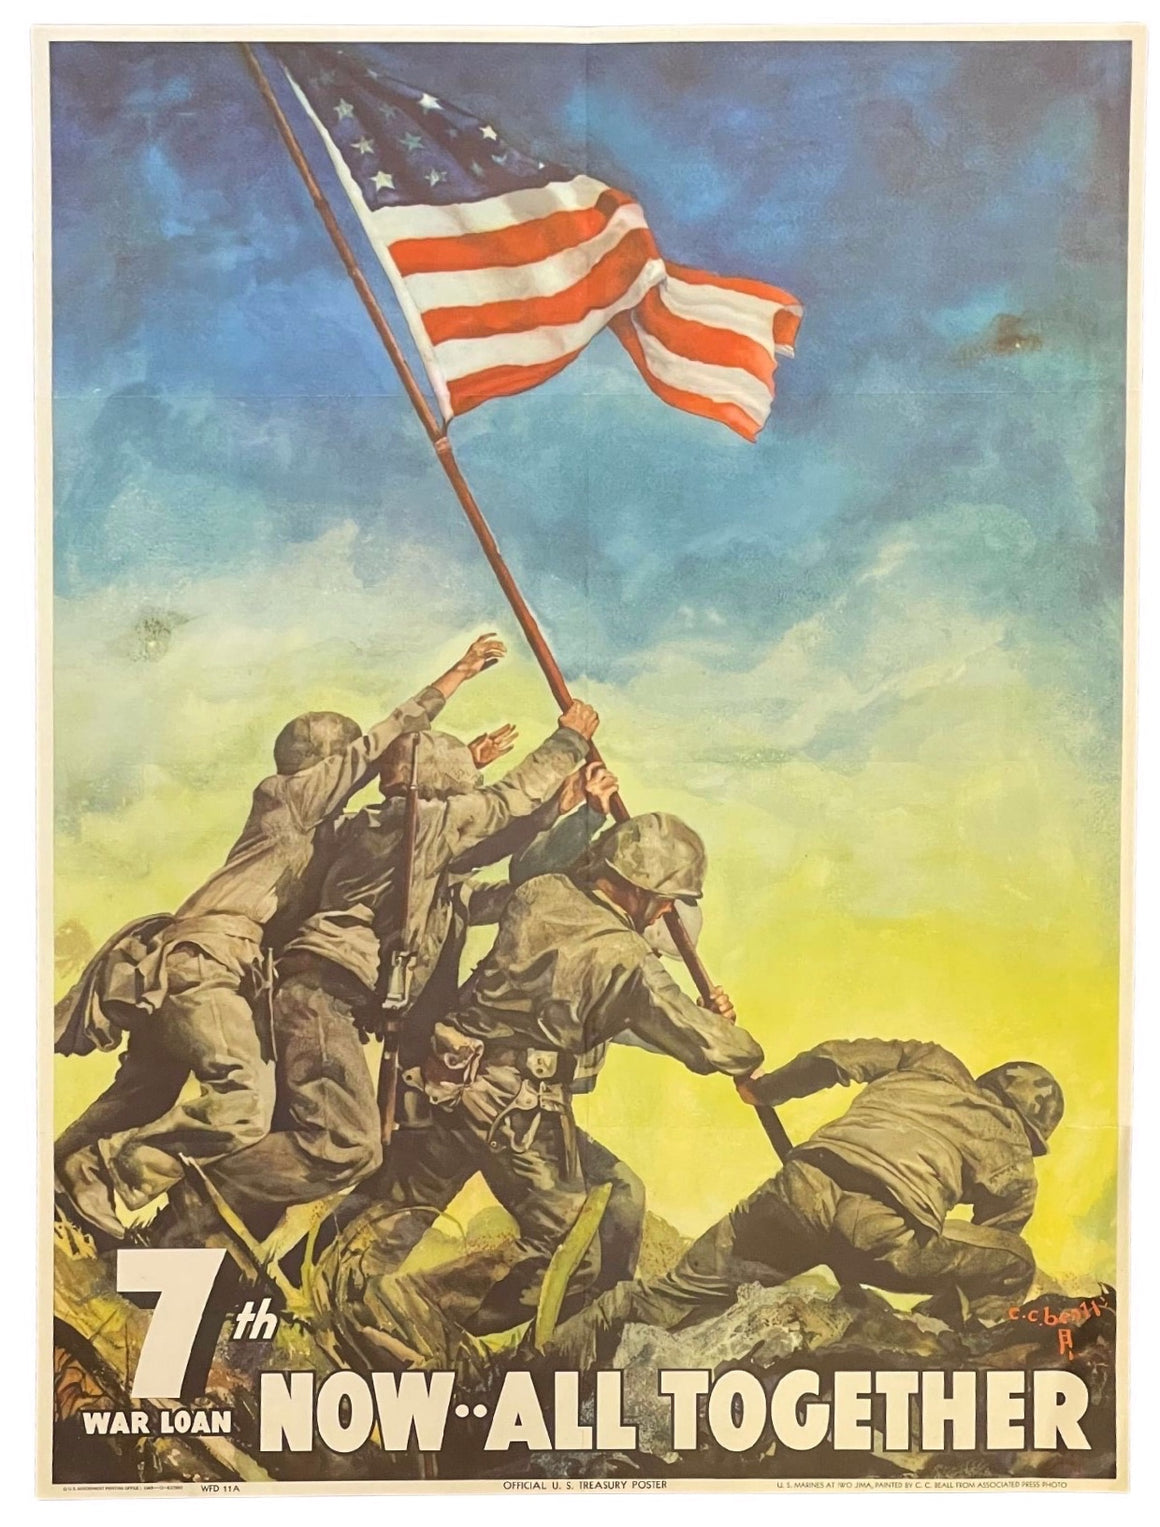 "7th War Loan. Now- All Together" Vintage WWII Poster by C.C. Beall, 1945